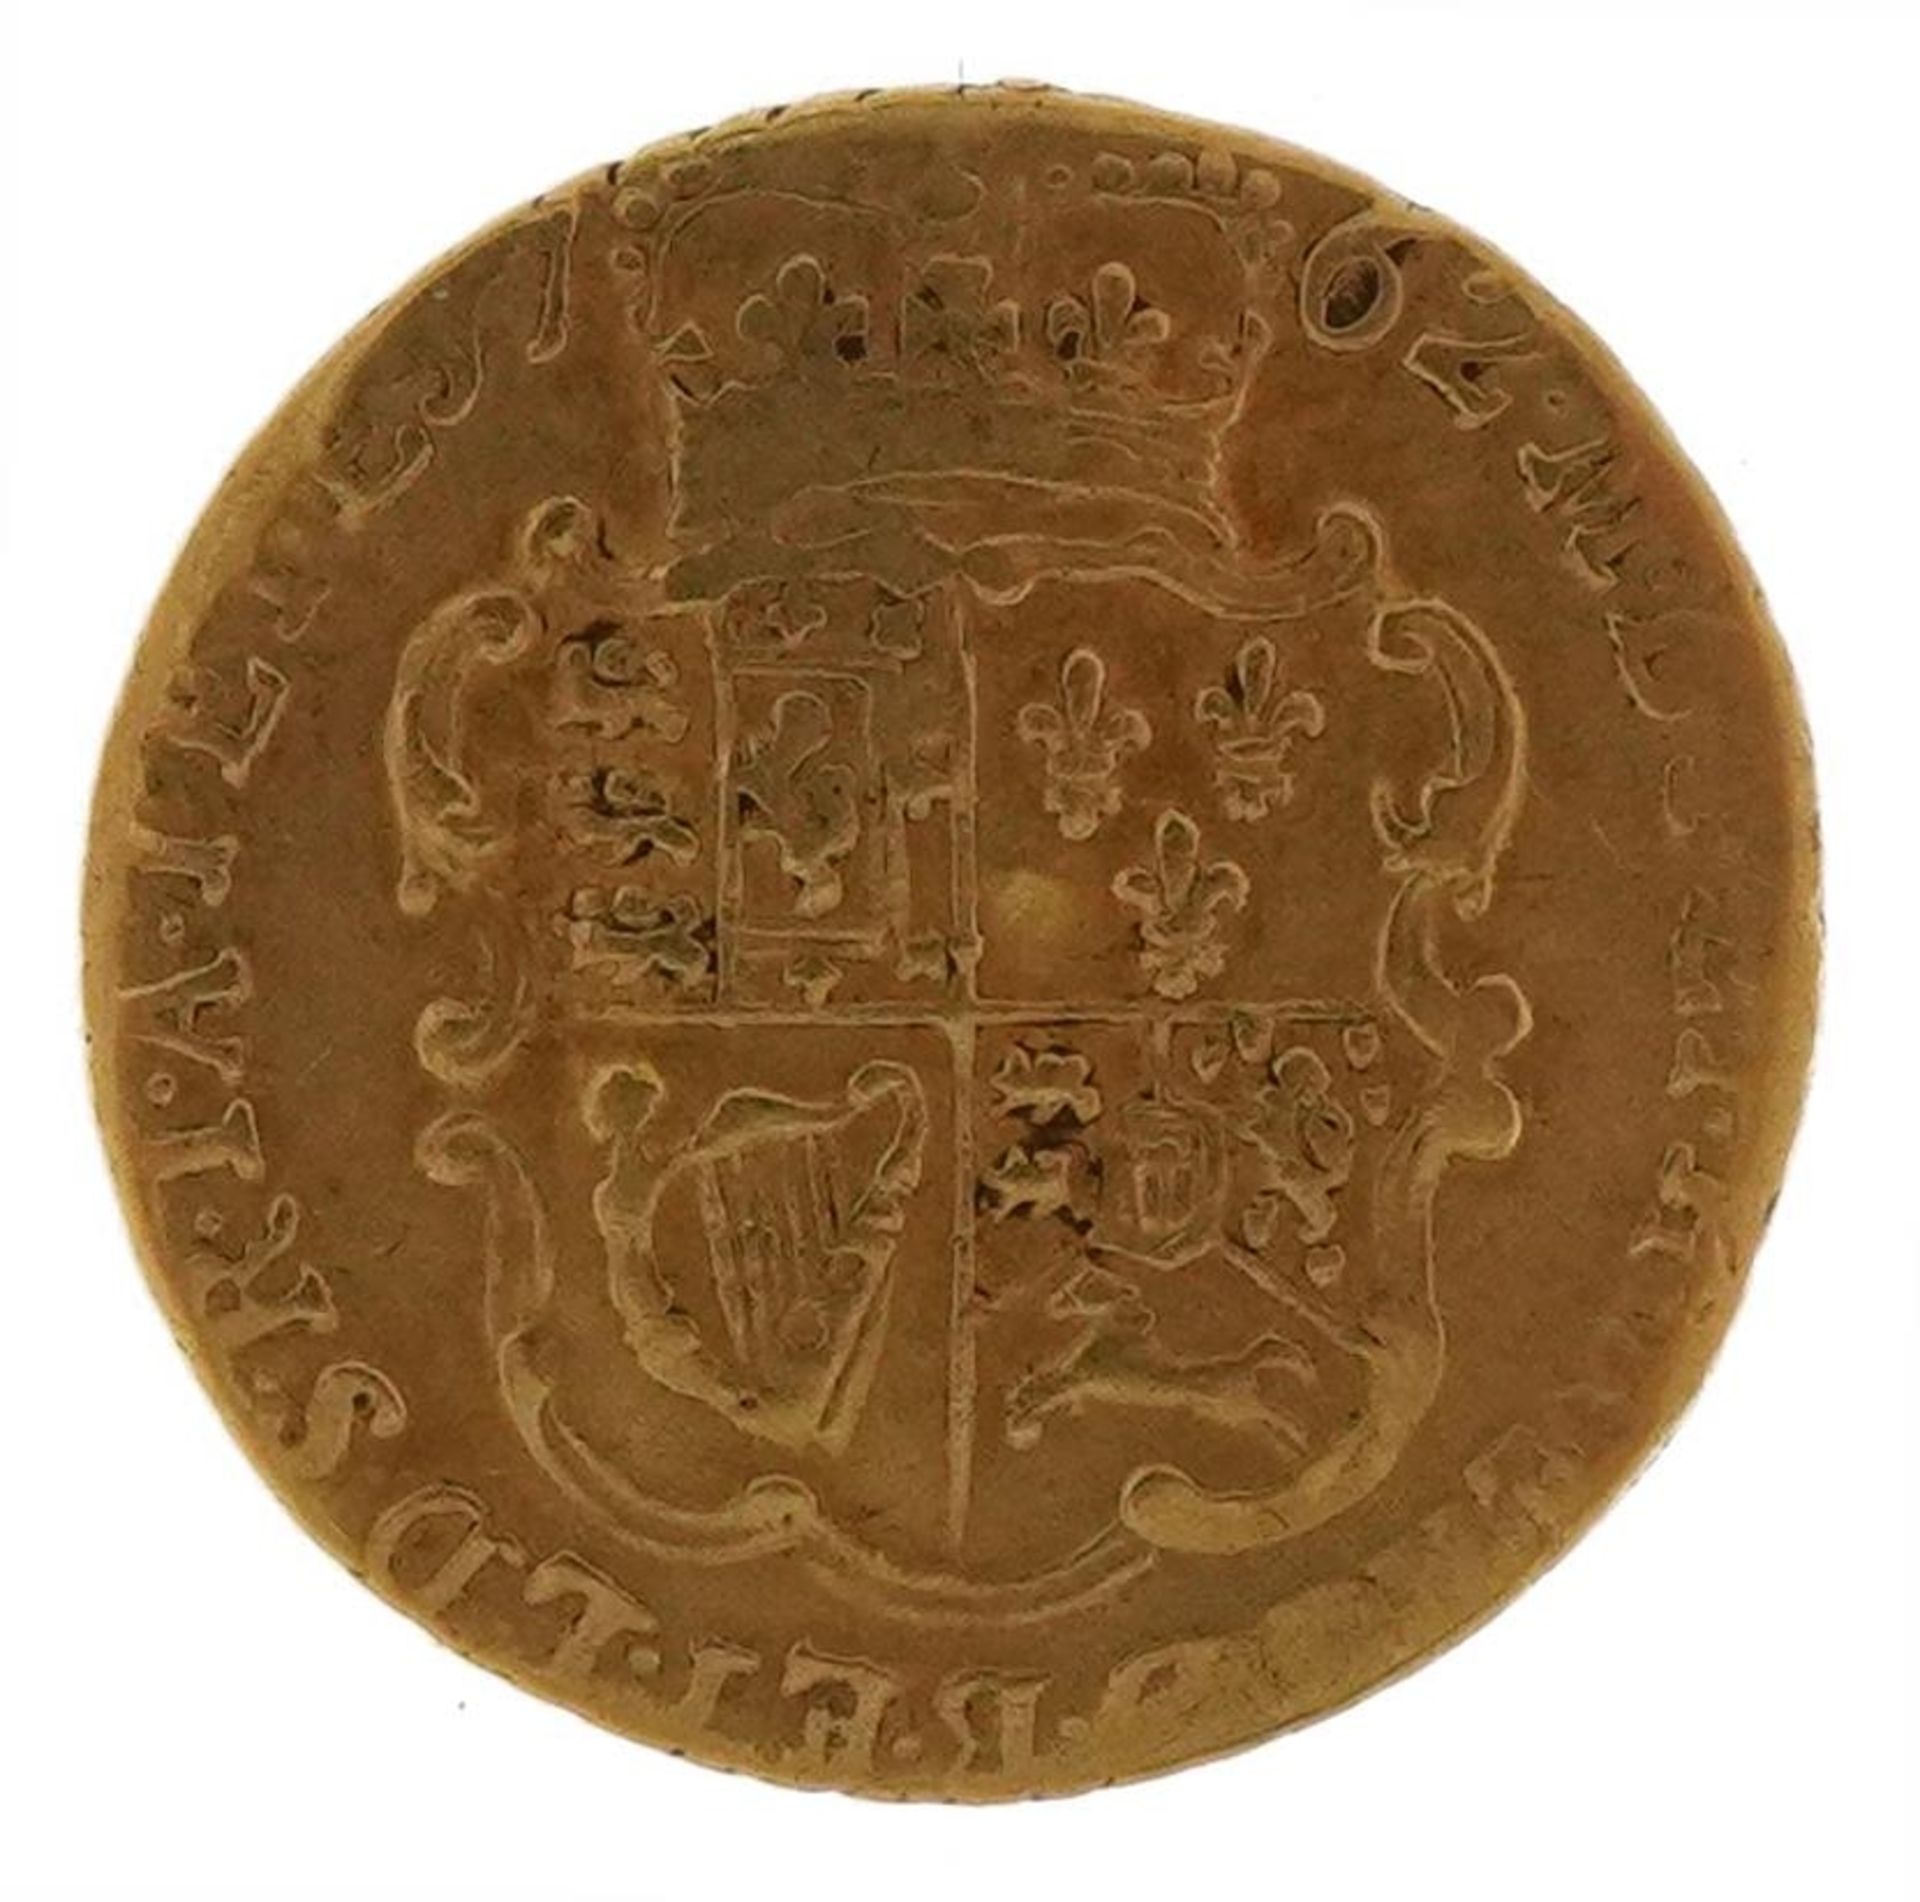 George III 1762 gold 1/4 guinea : For further information on this lot please visit www.